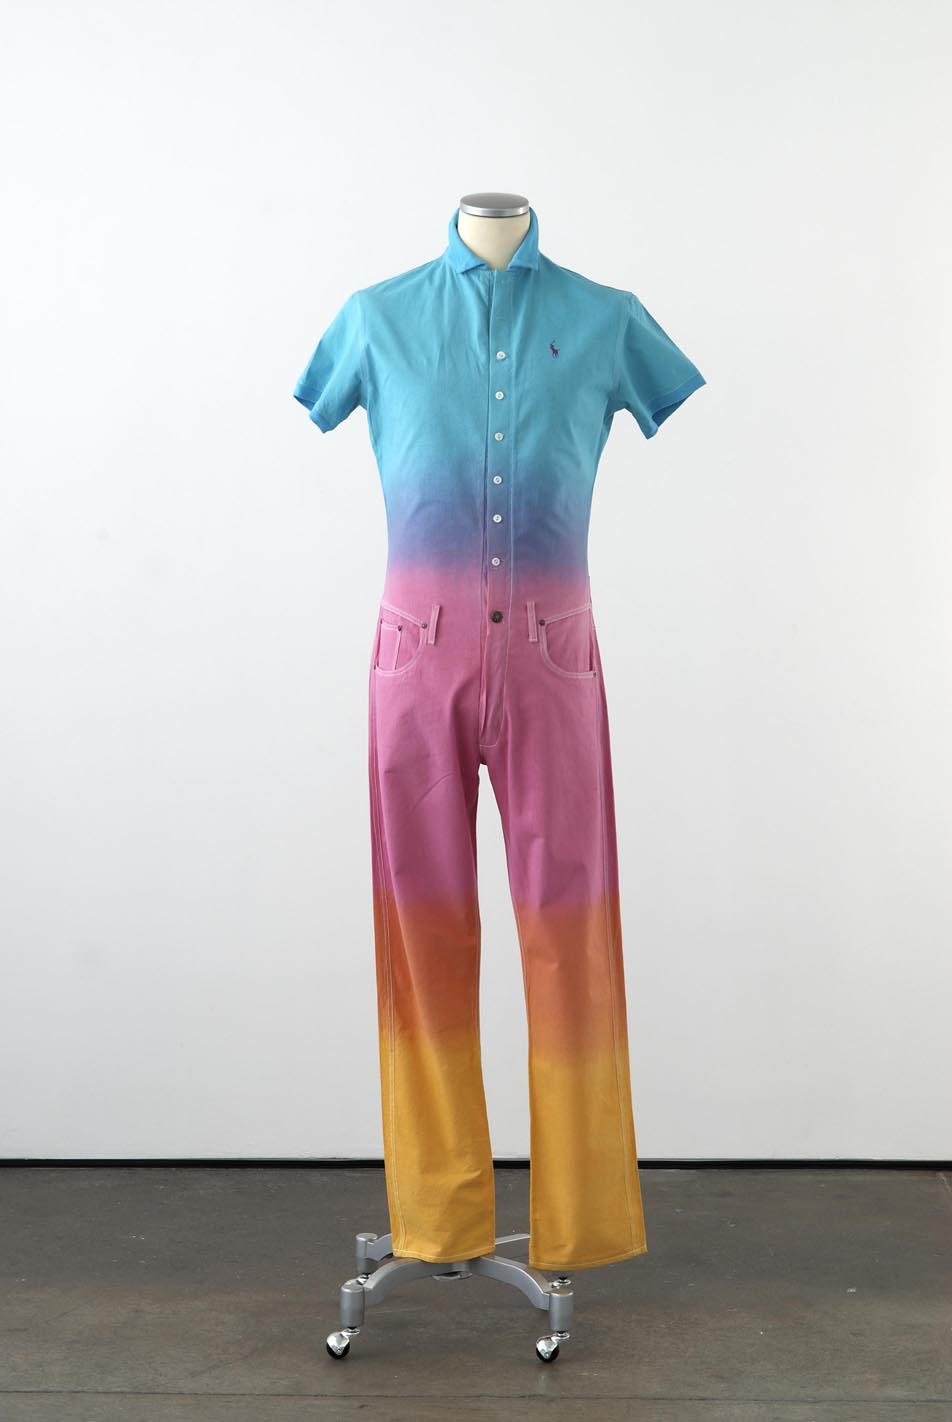     Matthew Darbyshire Standardised Production Clothing, Version 6 2009 Dip dyed calico, cotton jersey &amp; fittings on mannequin 185 x 45 x 34 cm 